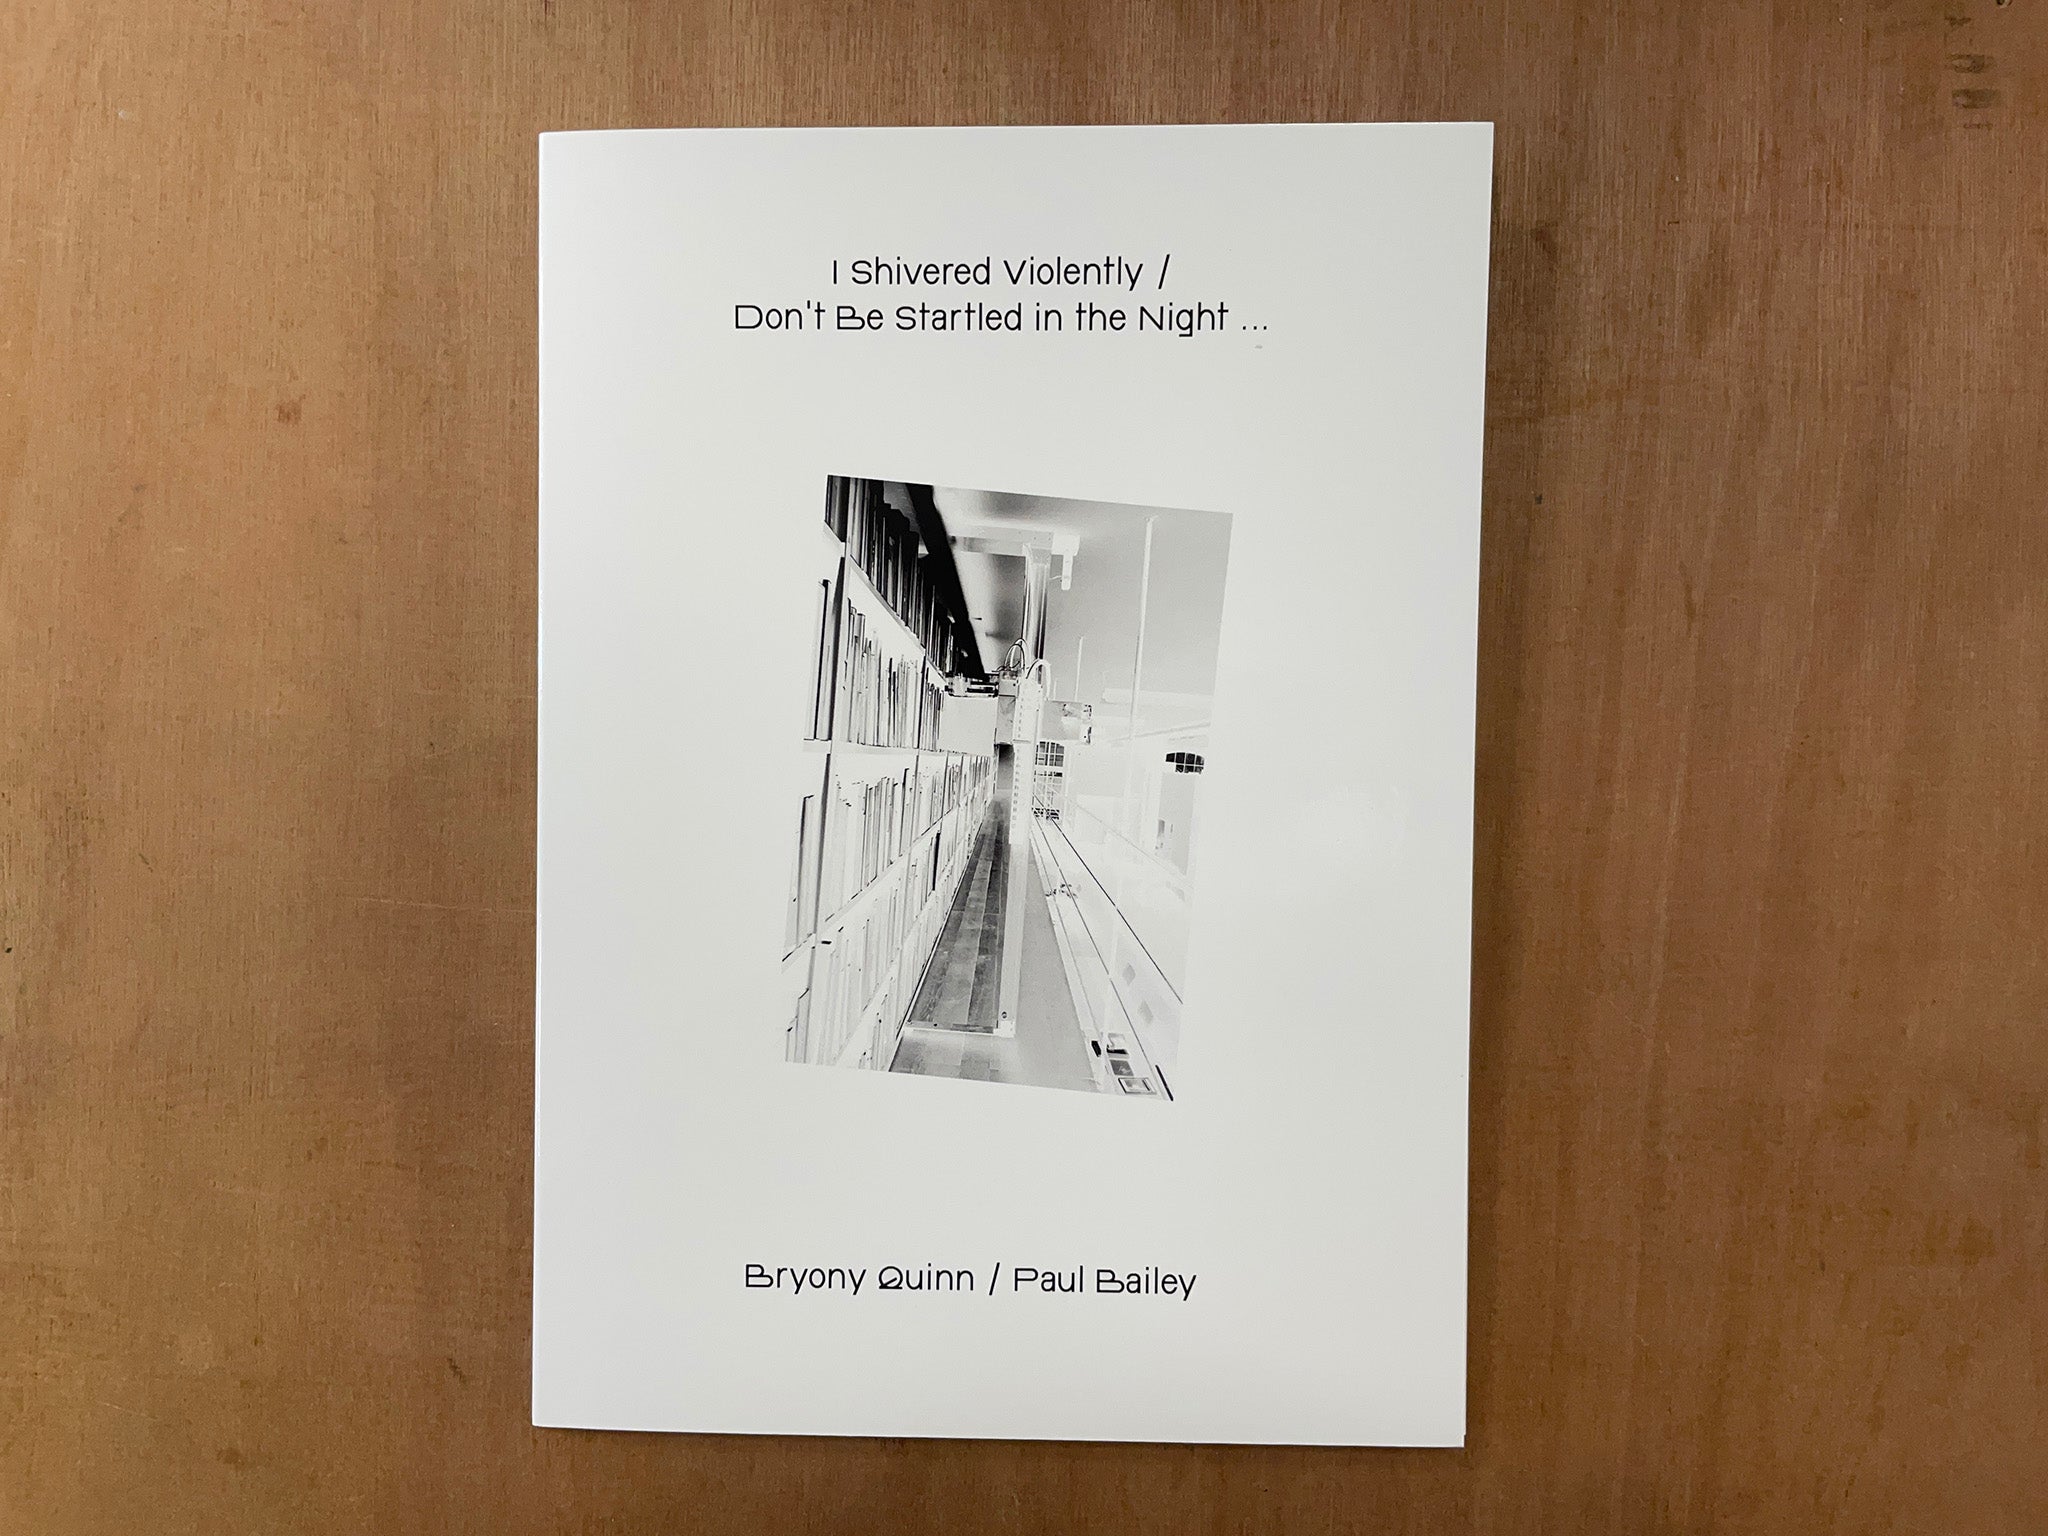 I SHIVERED VIOLENTLY / DON’T BE STARTLED IN THE NIGHT Ed. by Bryony Quinn & Paul Bailey